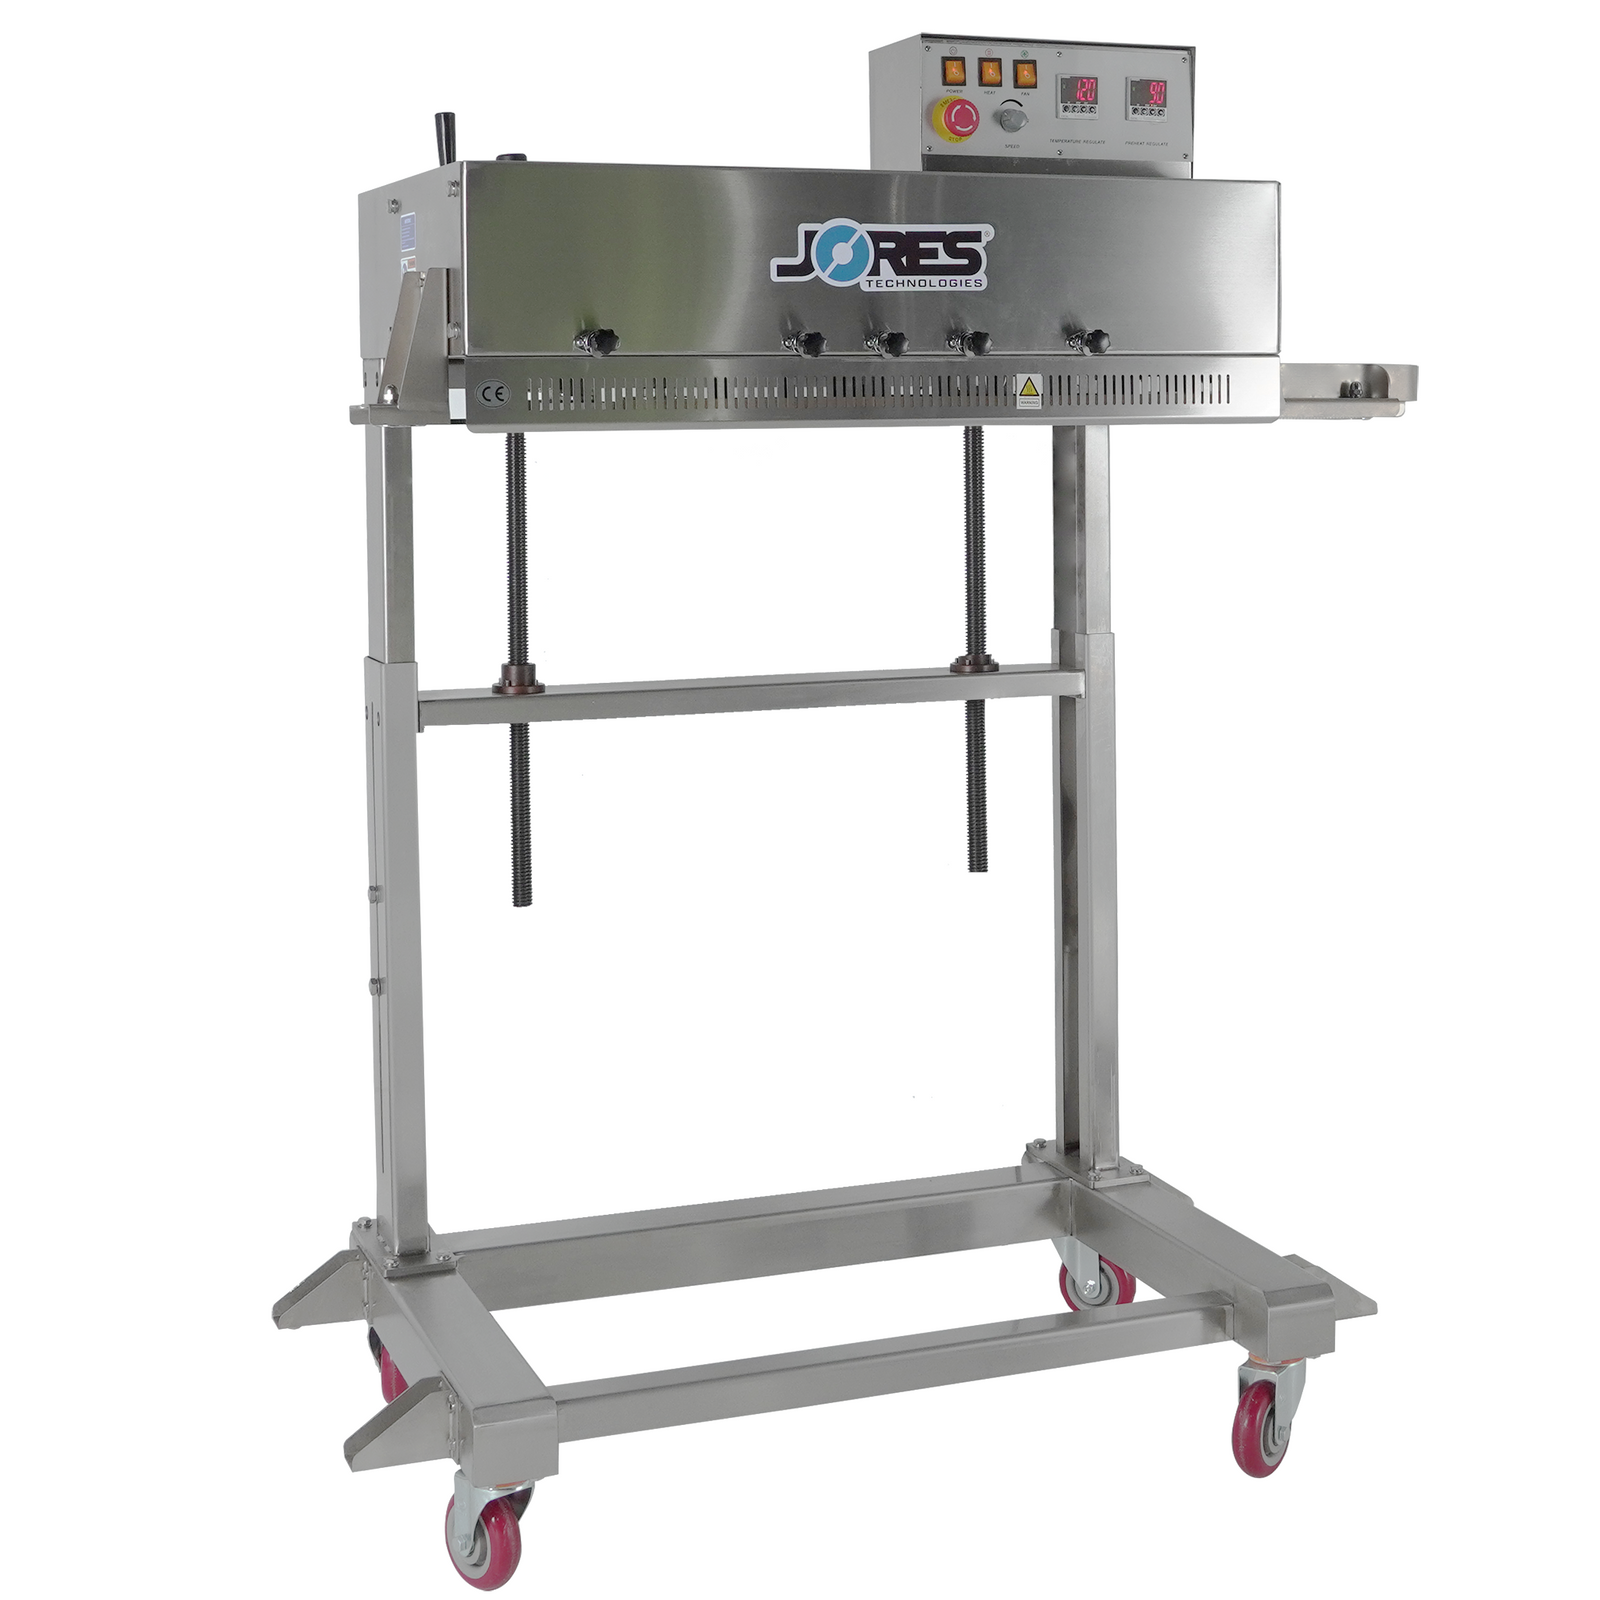 Conveyorless continuous band sealer for variable bag heights for industrial use